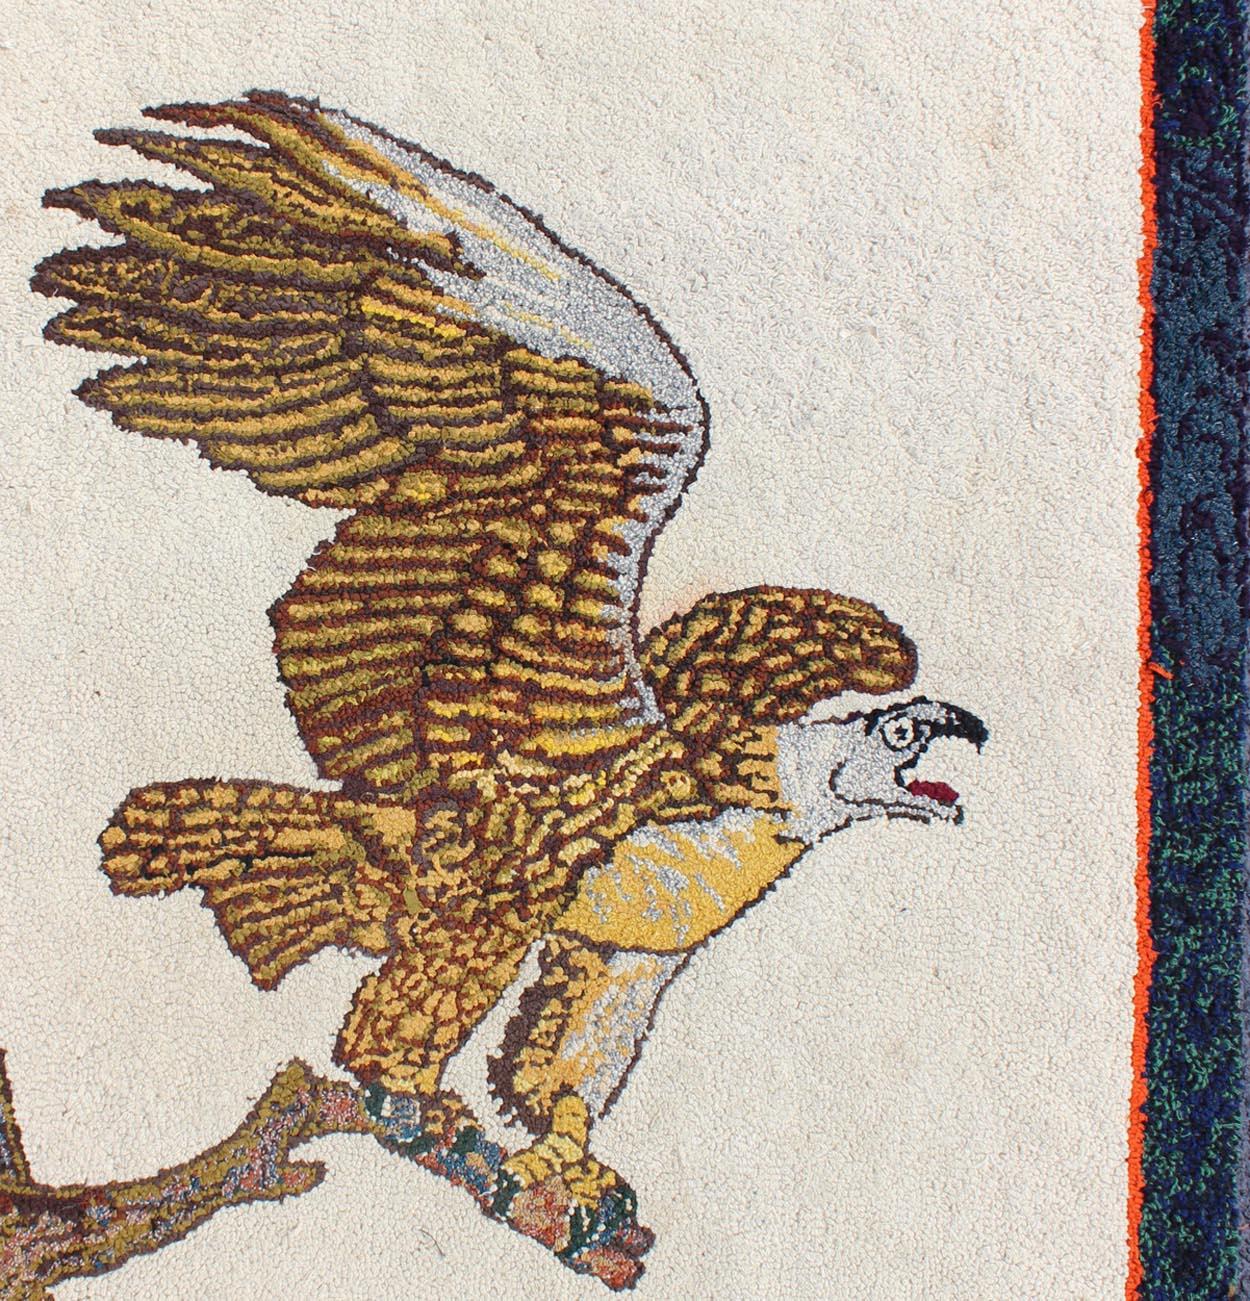 Creams and Gold, tan antique American hooked rug with a bald eagle on a tree , Keivan Woven Arts / rug J10-1201, country of origin / type: United States / Hooked, circa 1950

This colorful American hooked rug depicts a American Bald Eagle before